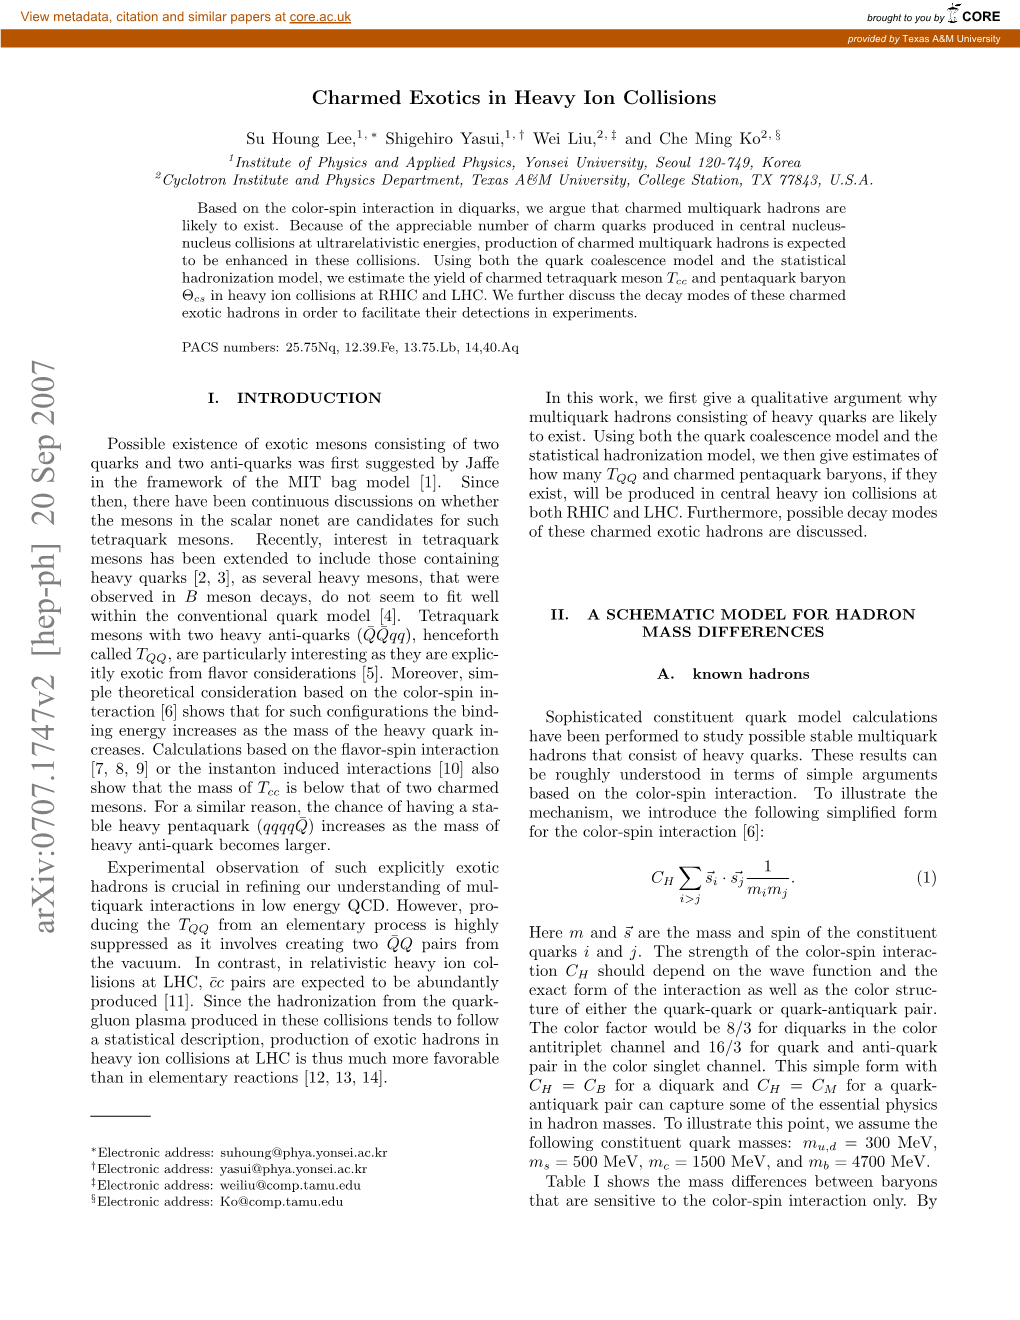 Arxiv:0707.1747V2 [Hep-Ph] 20 Sep 2007 QQ ¯ Here M and ~S Are the Mass and Spin of the Constituent Suppressed As It Involves Creating Two QQ Pairs from Quarks I and J